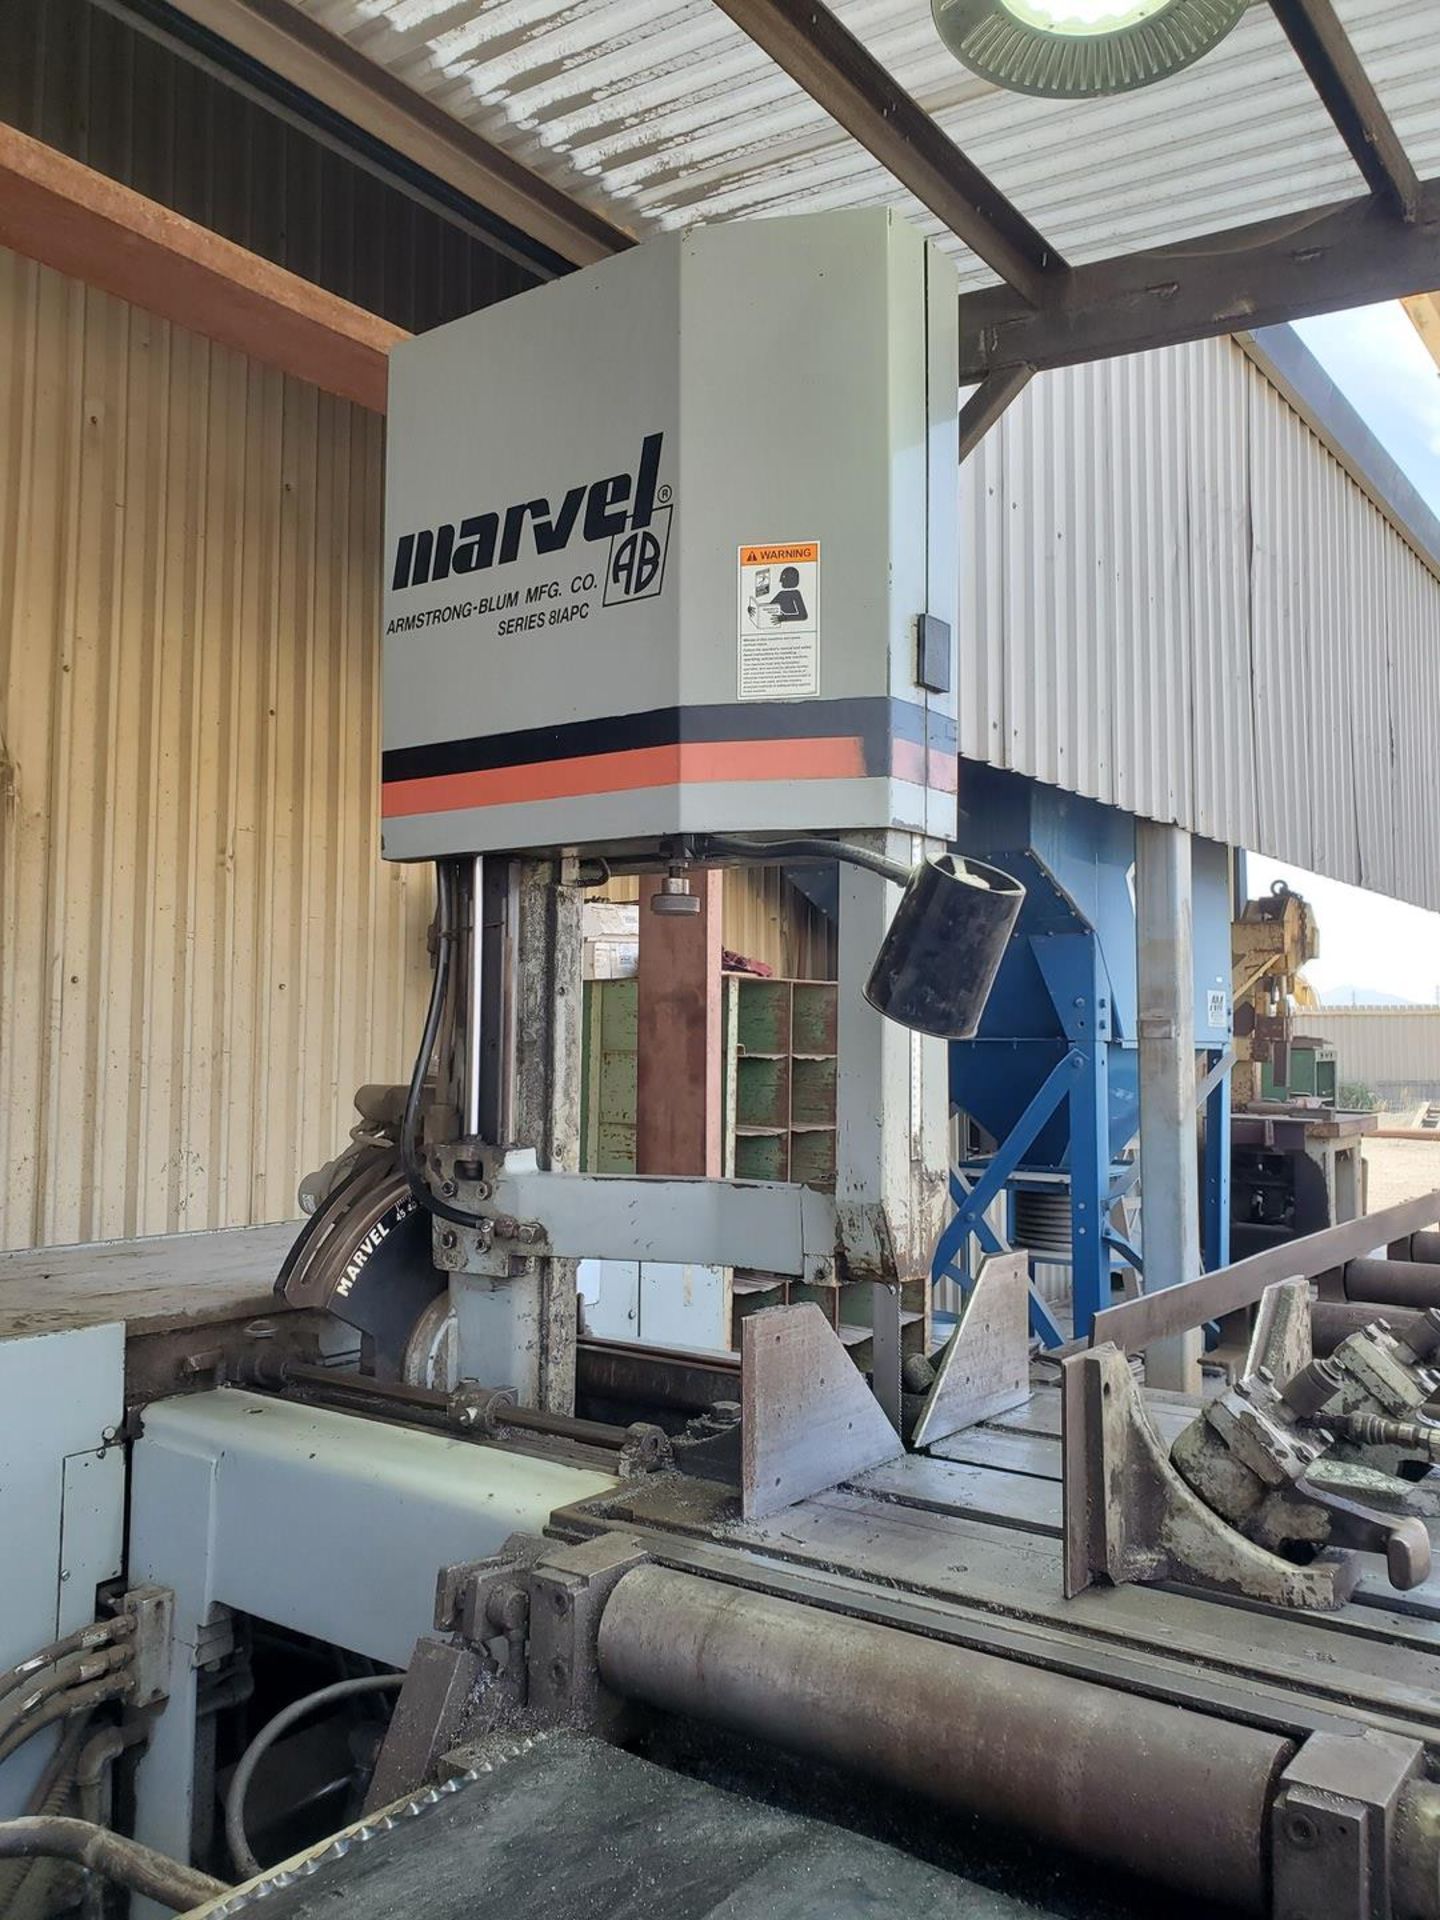 Marvel M5 20"x18" Vertical Band Saw - Image 13 of 25